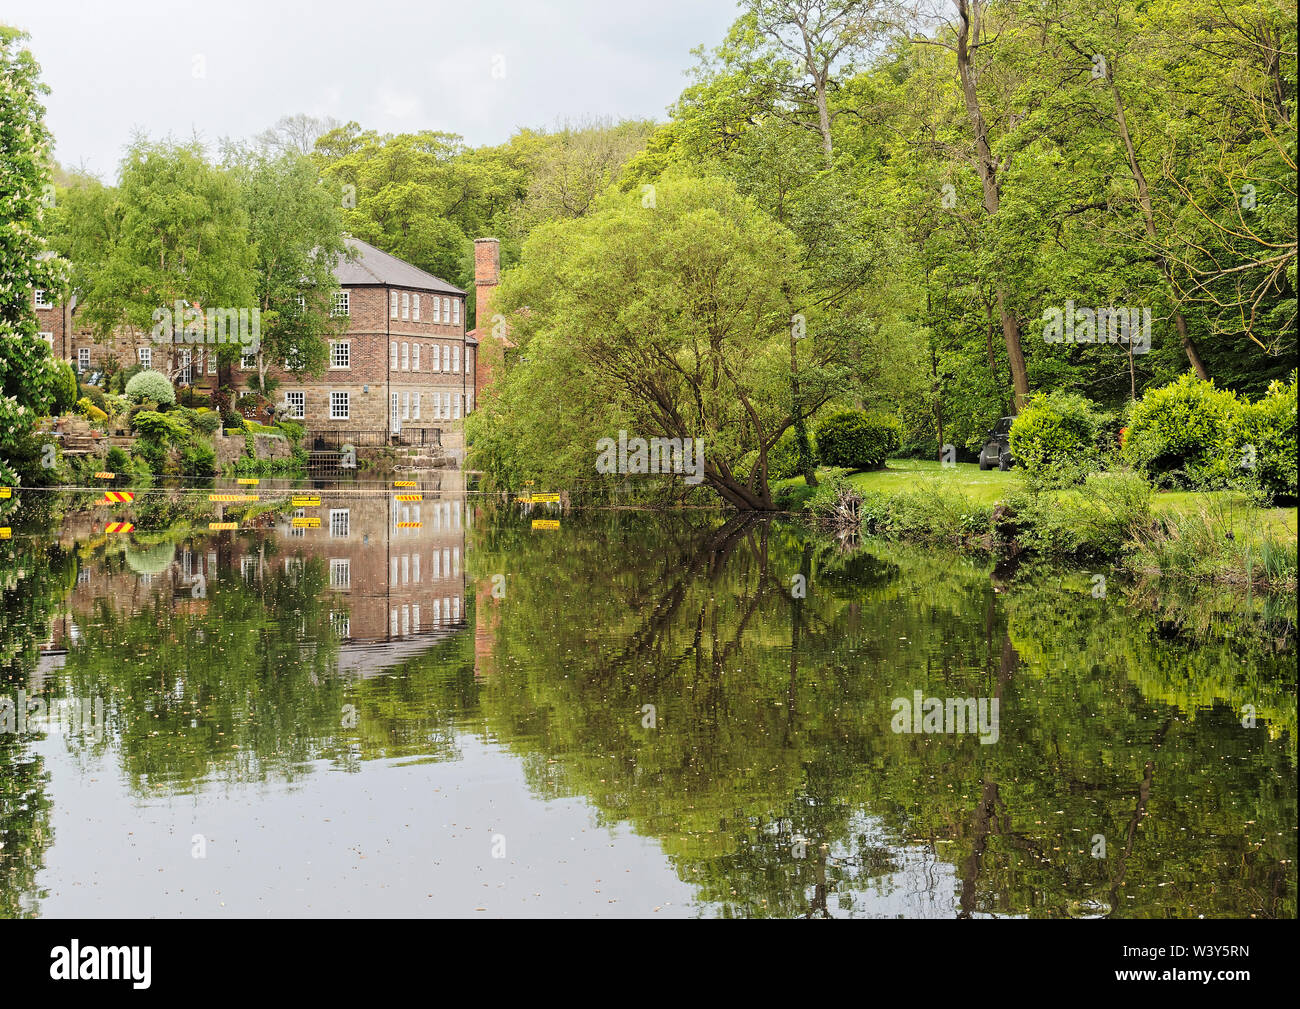 Looking downstream along the River Nidd in Knaresborough, North Yorkshire towards a weir and a former mill now converted into a house. Stock Photo